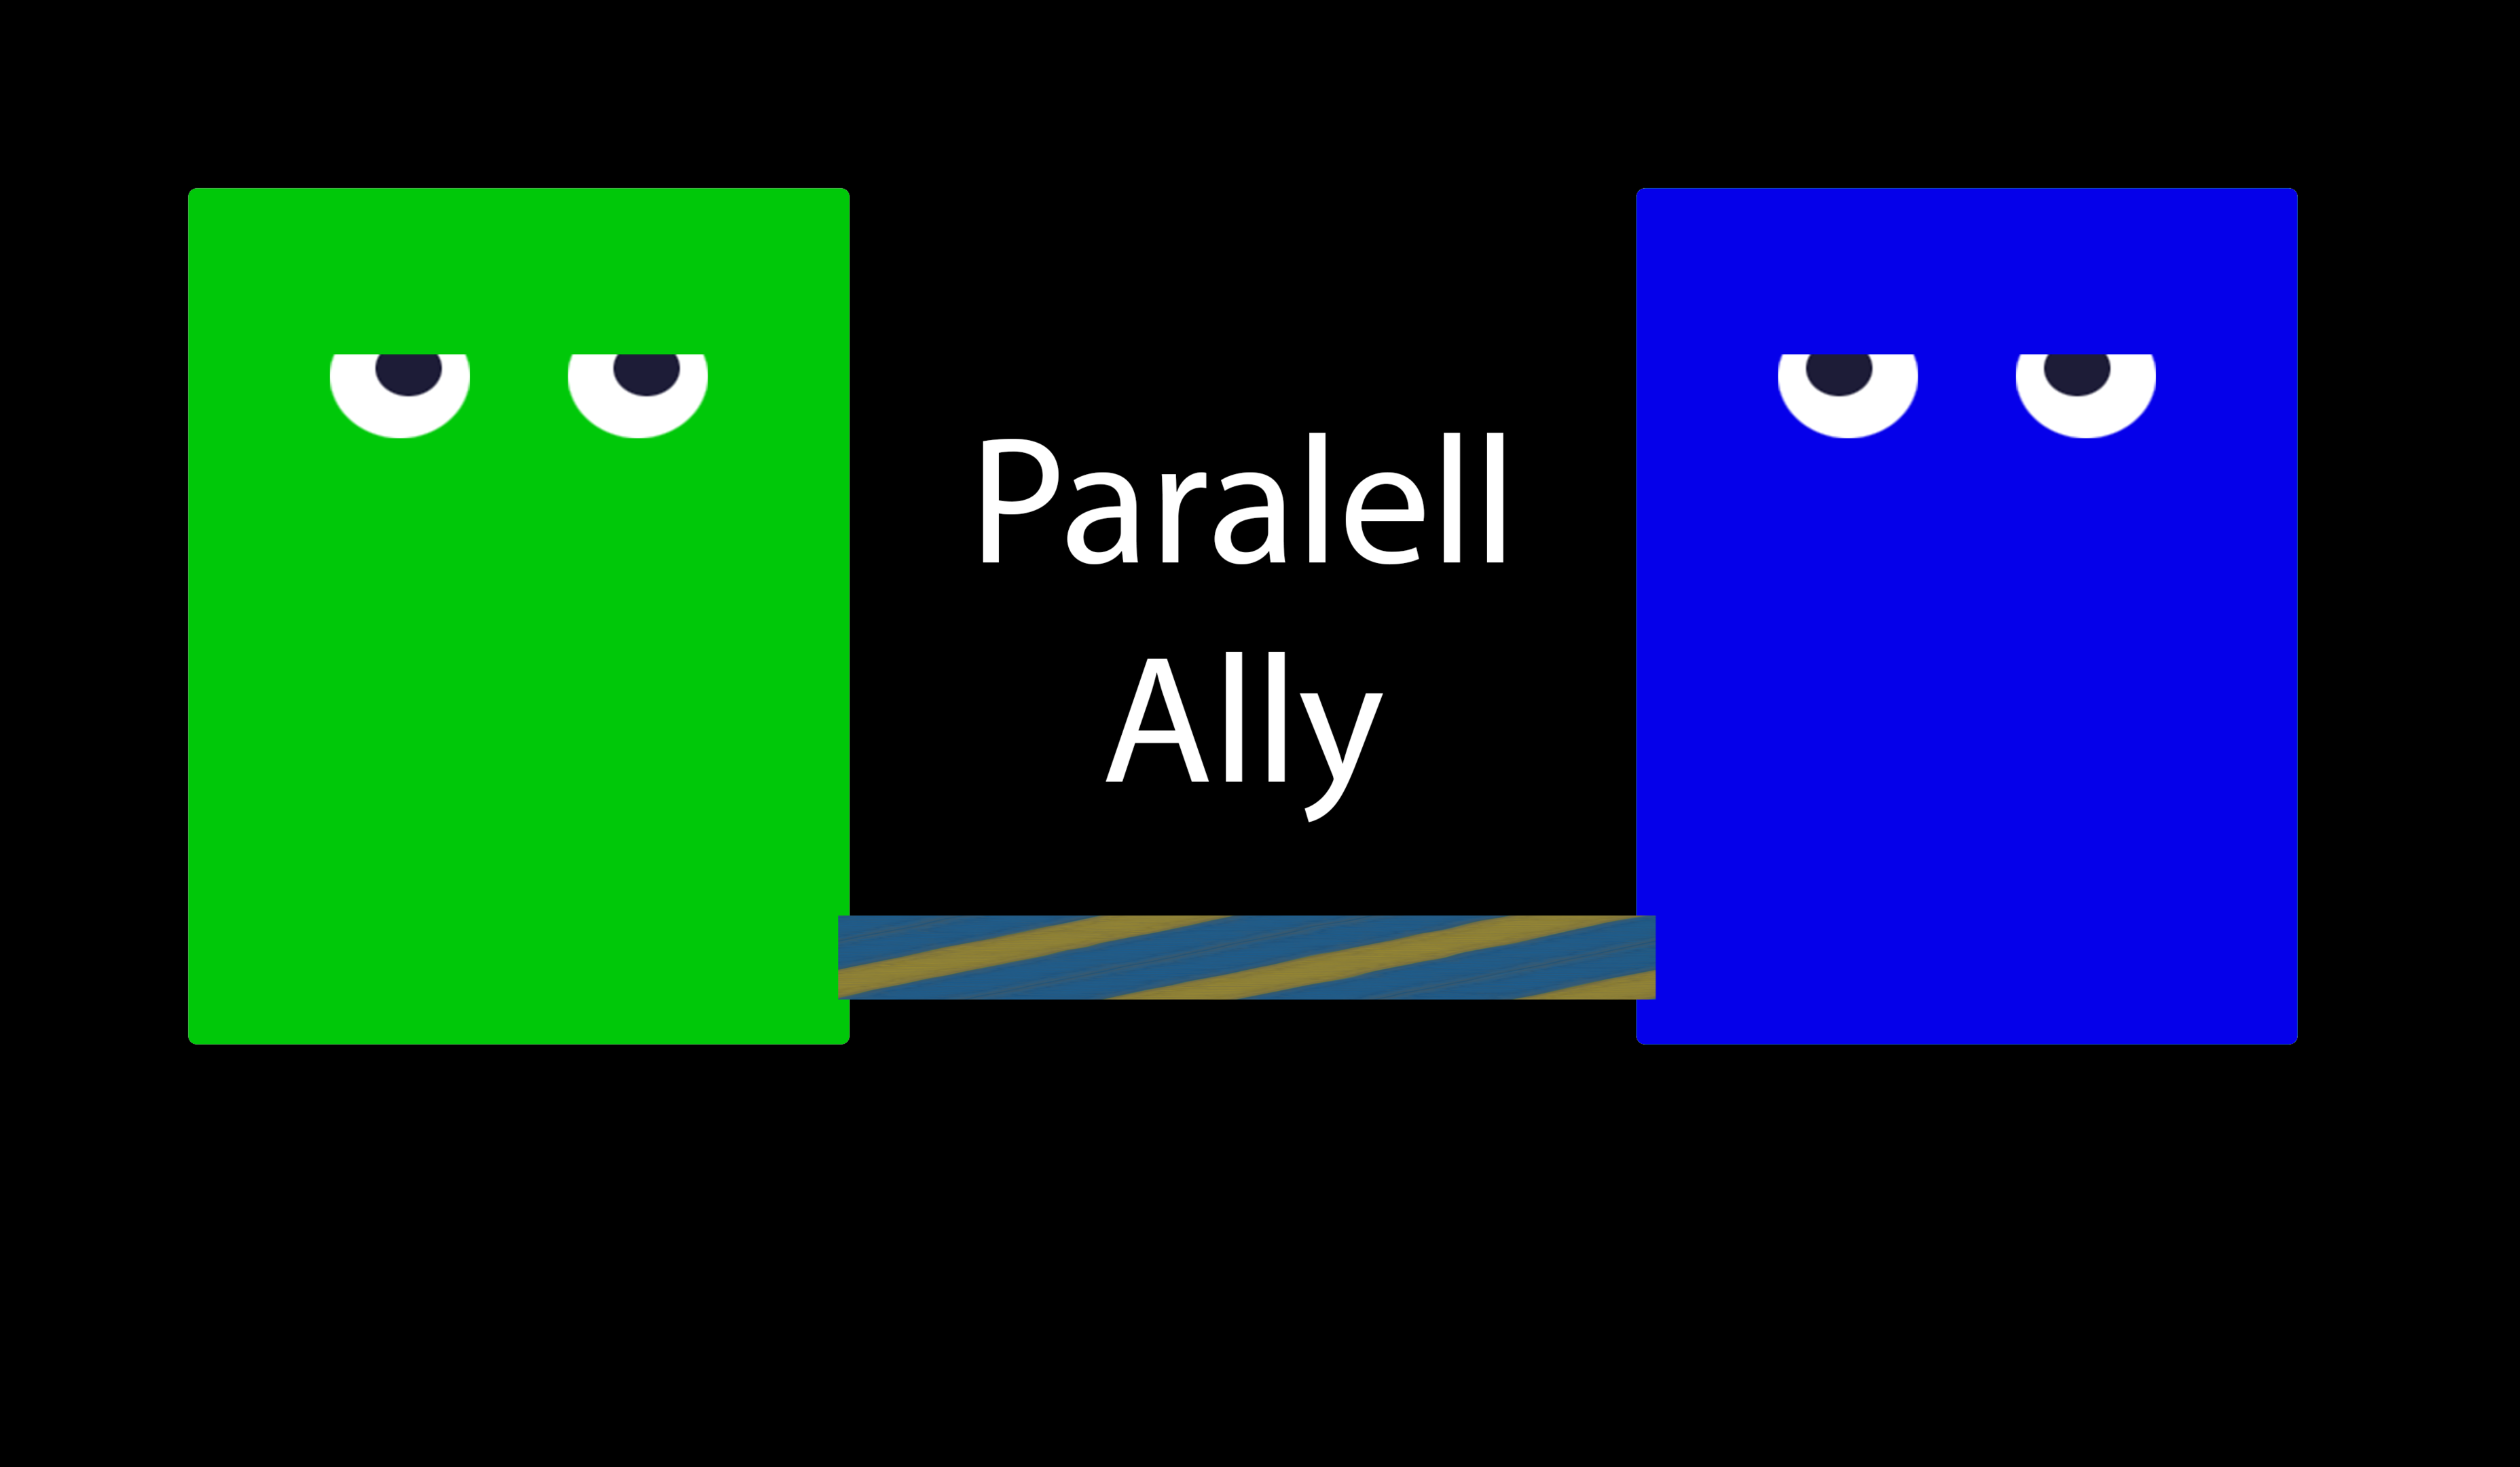 Paralell Ally - Lost Relic games Game Jam